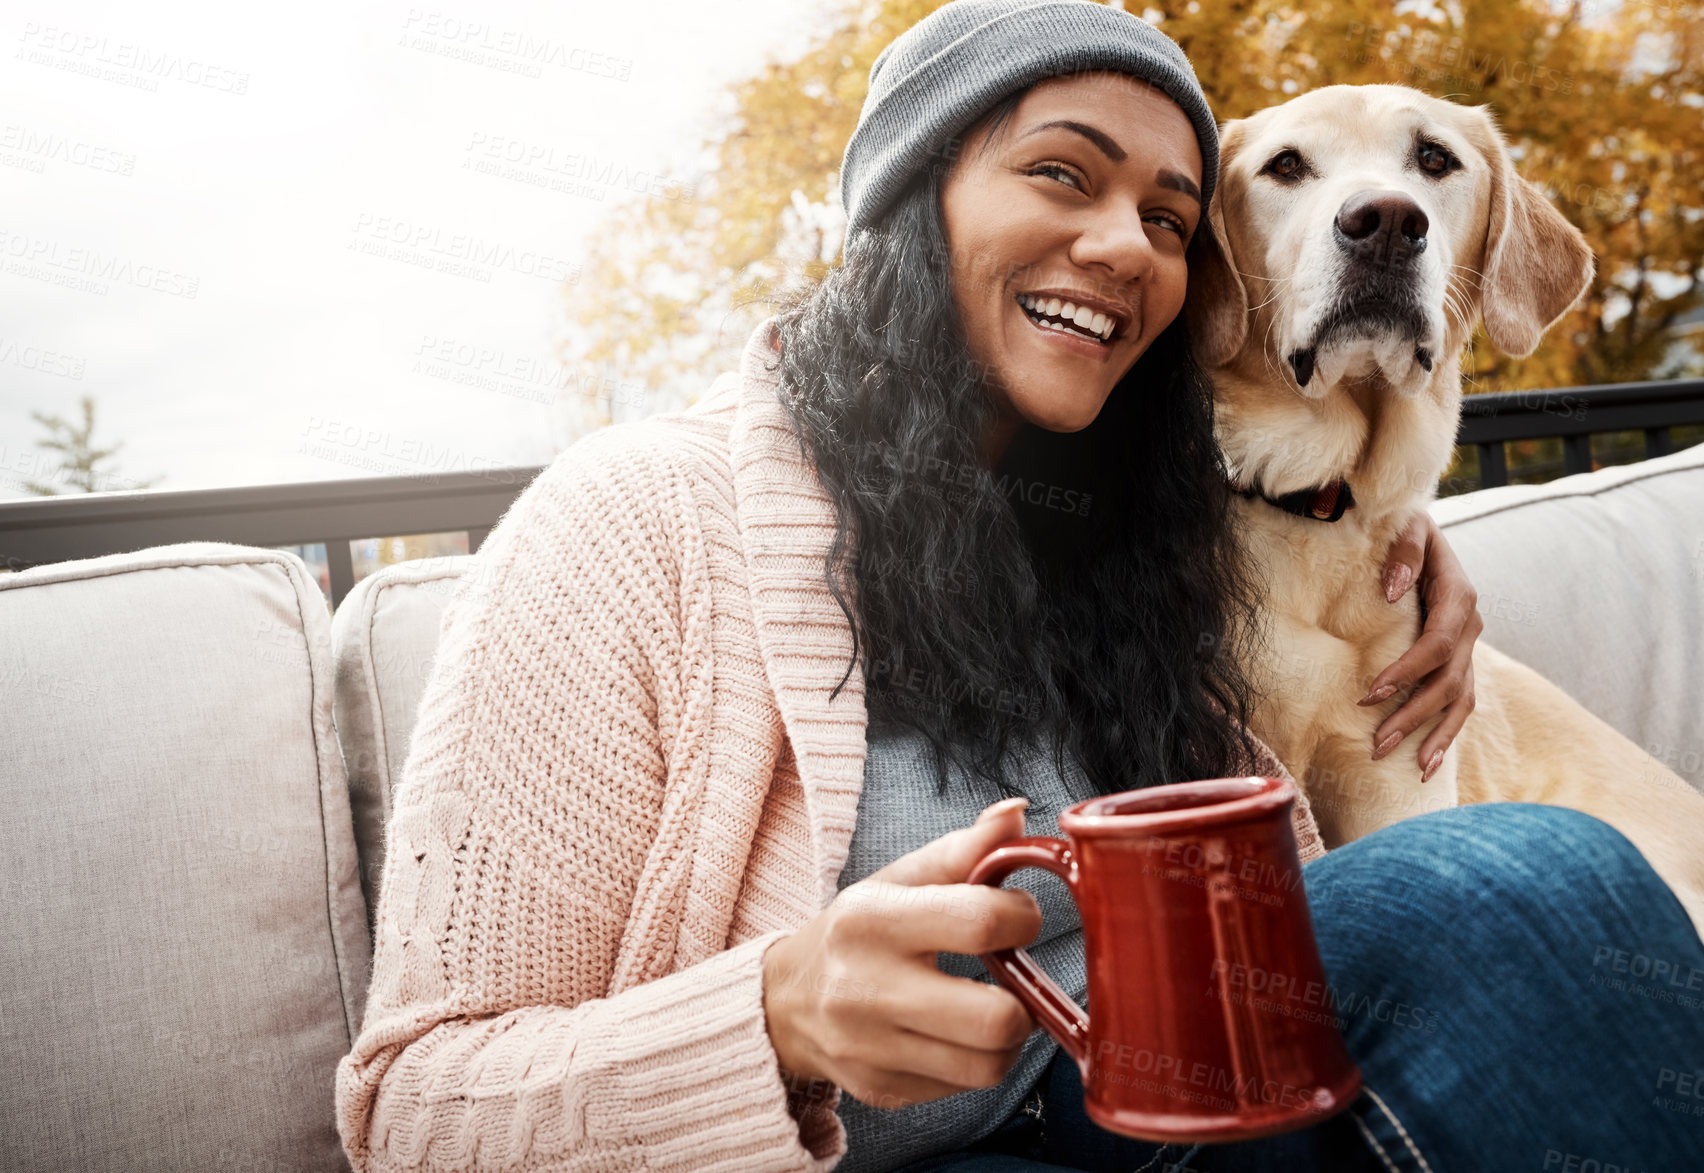 Buy stock photo Shot of a young woman relaxing with her dog outside